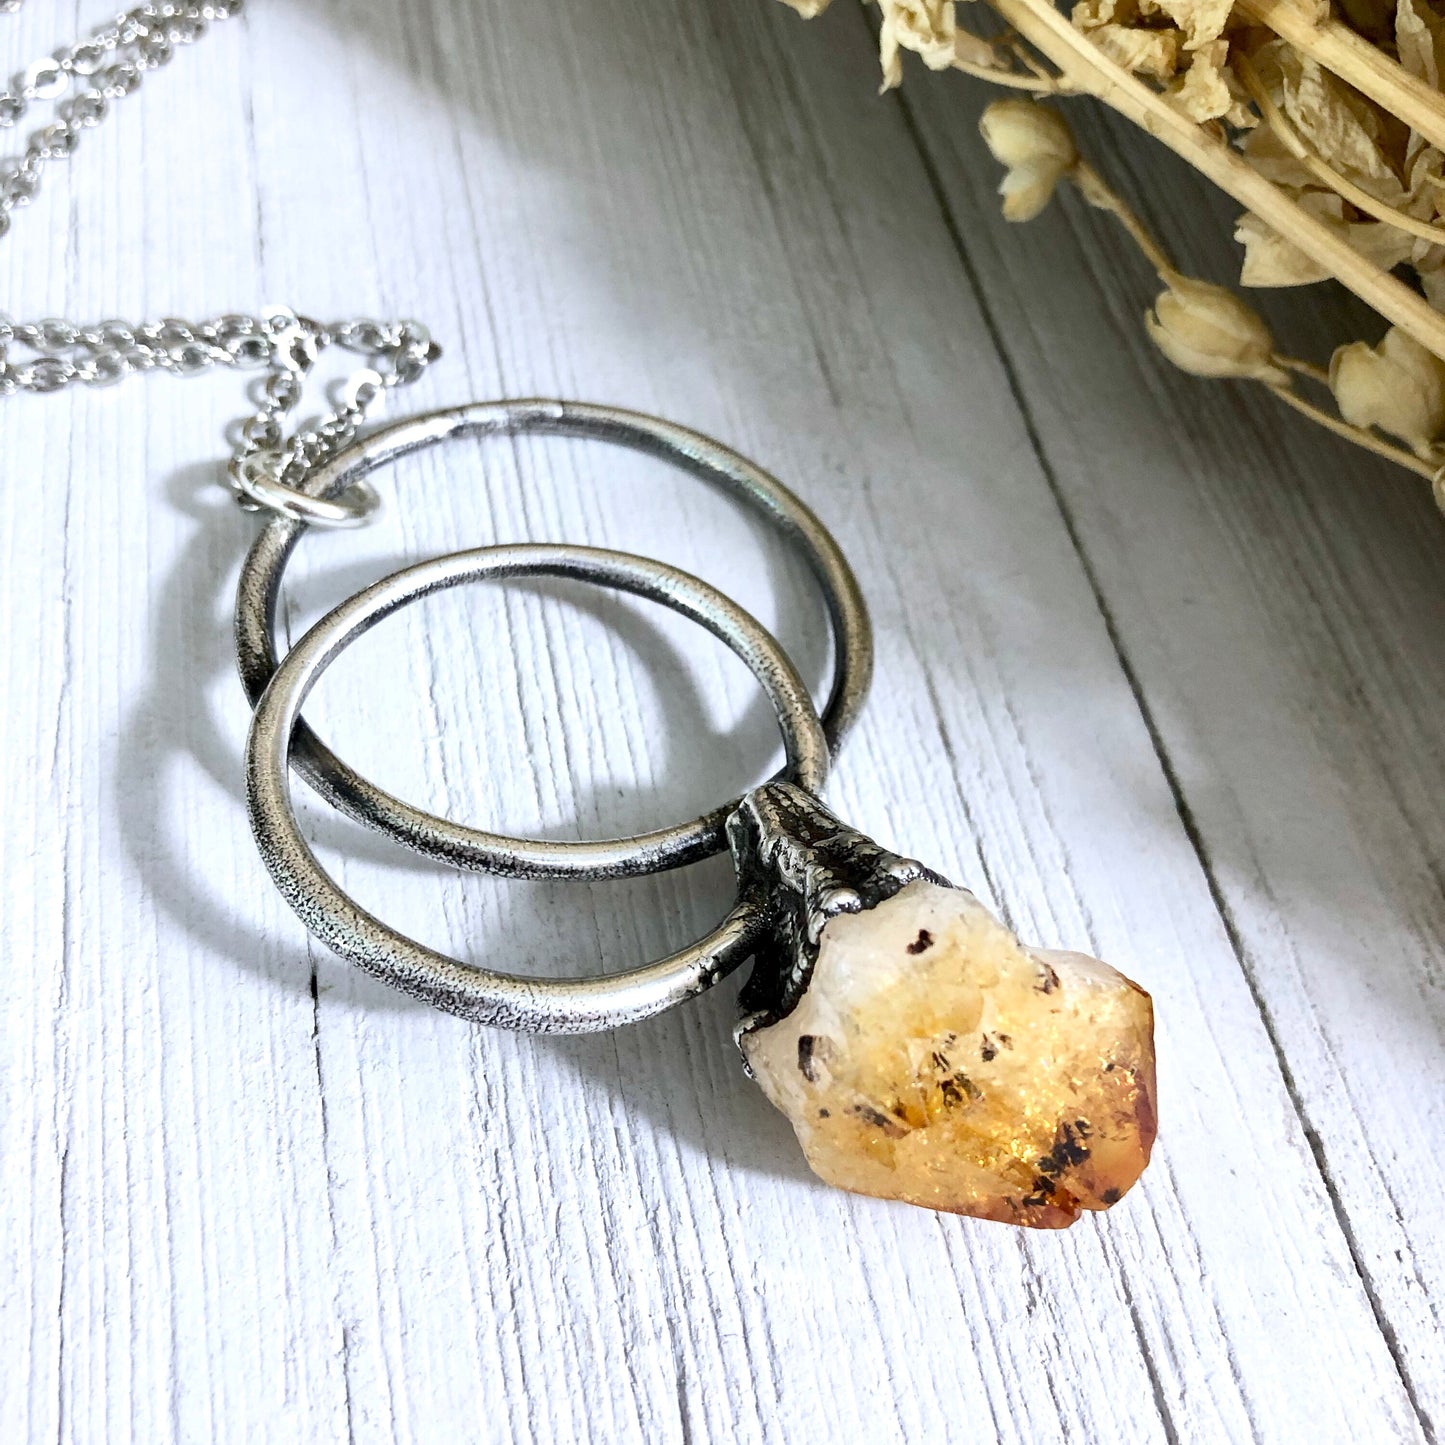 Large Citrine Necklace / Big Crystal Necklace Silver / Natural Crystal Jewelry